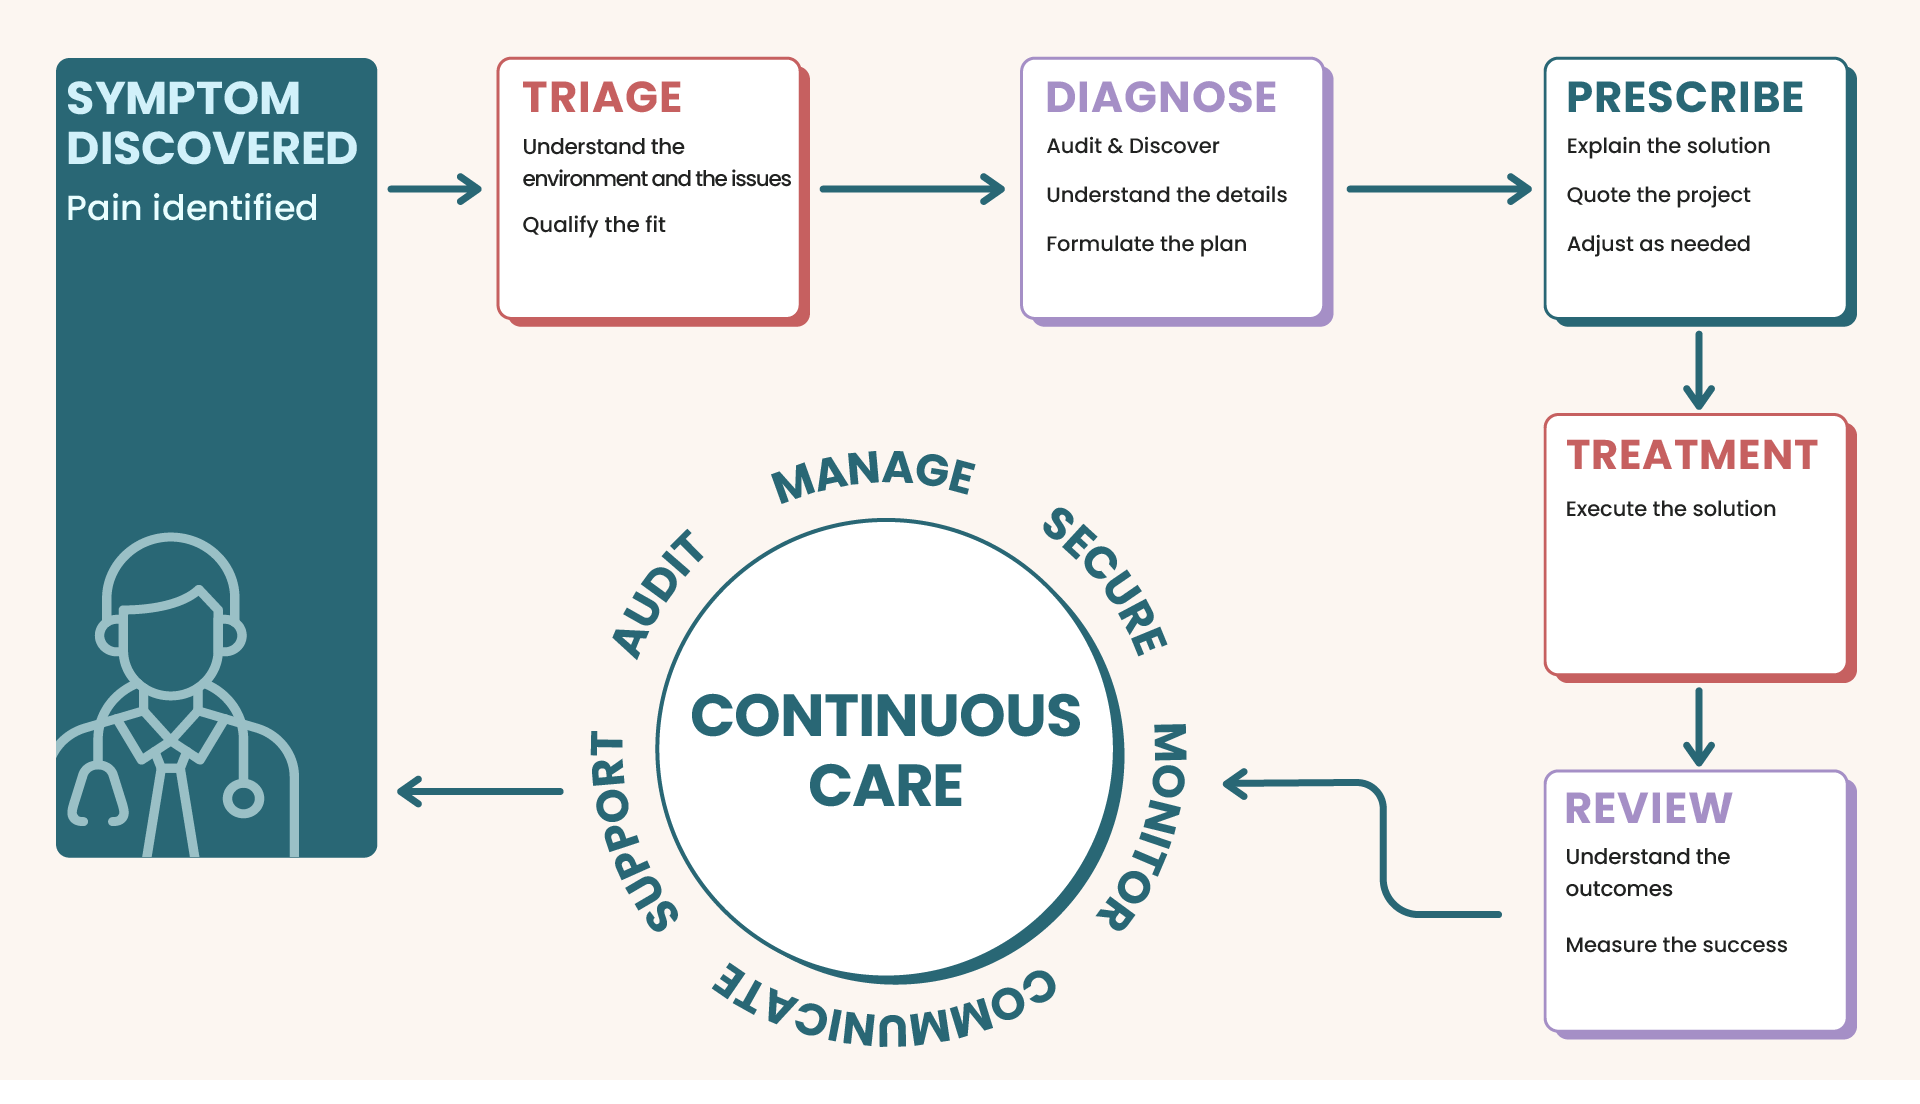 Flowchart defining how Health IT handles proactive tech support. From discovering symptoms, to triaging the issue, diagnosing details, prescribing a solution, treating with a plan, and reviewing the outcome, to our continuous proactive care cycle.